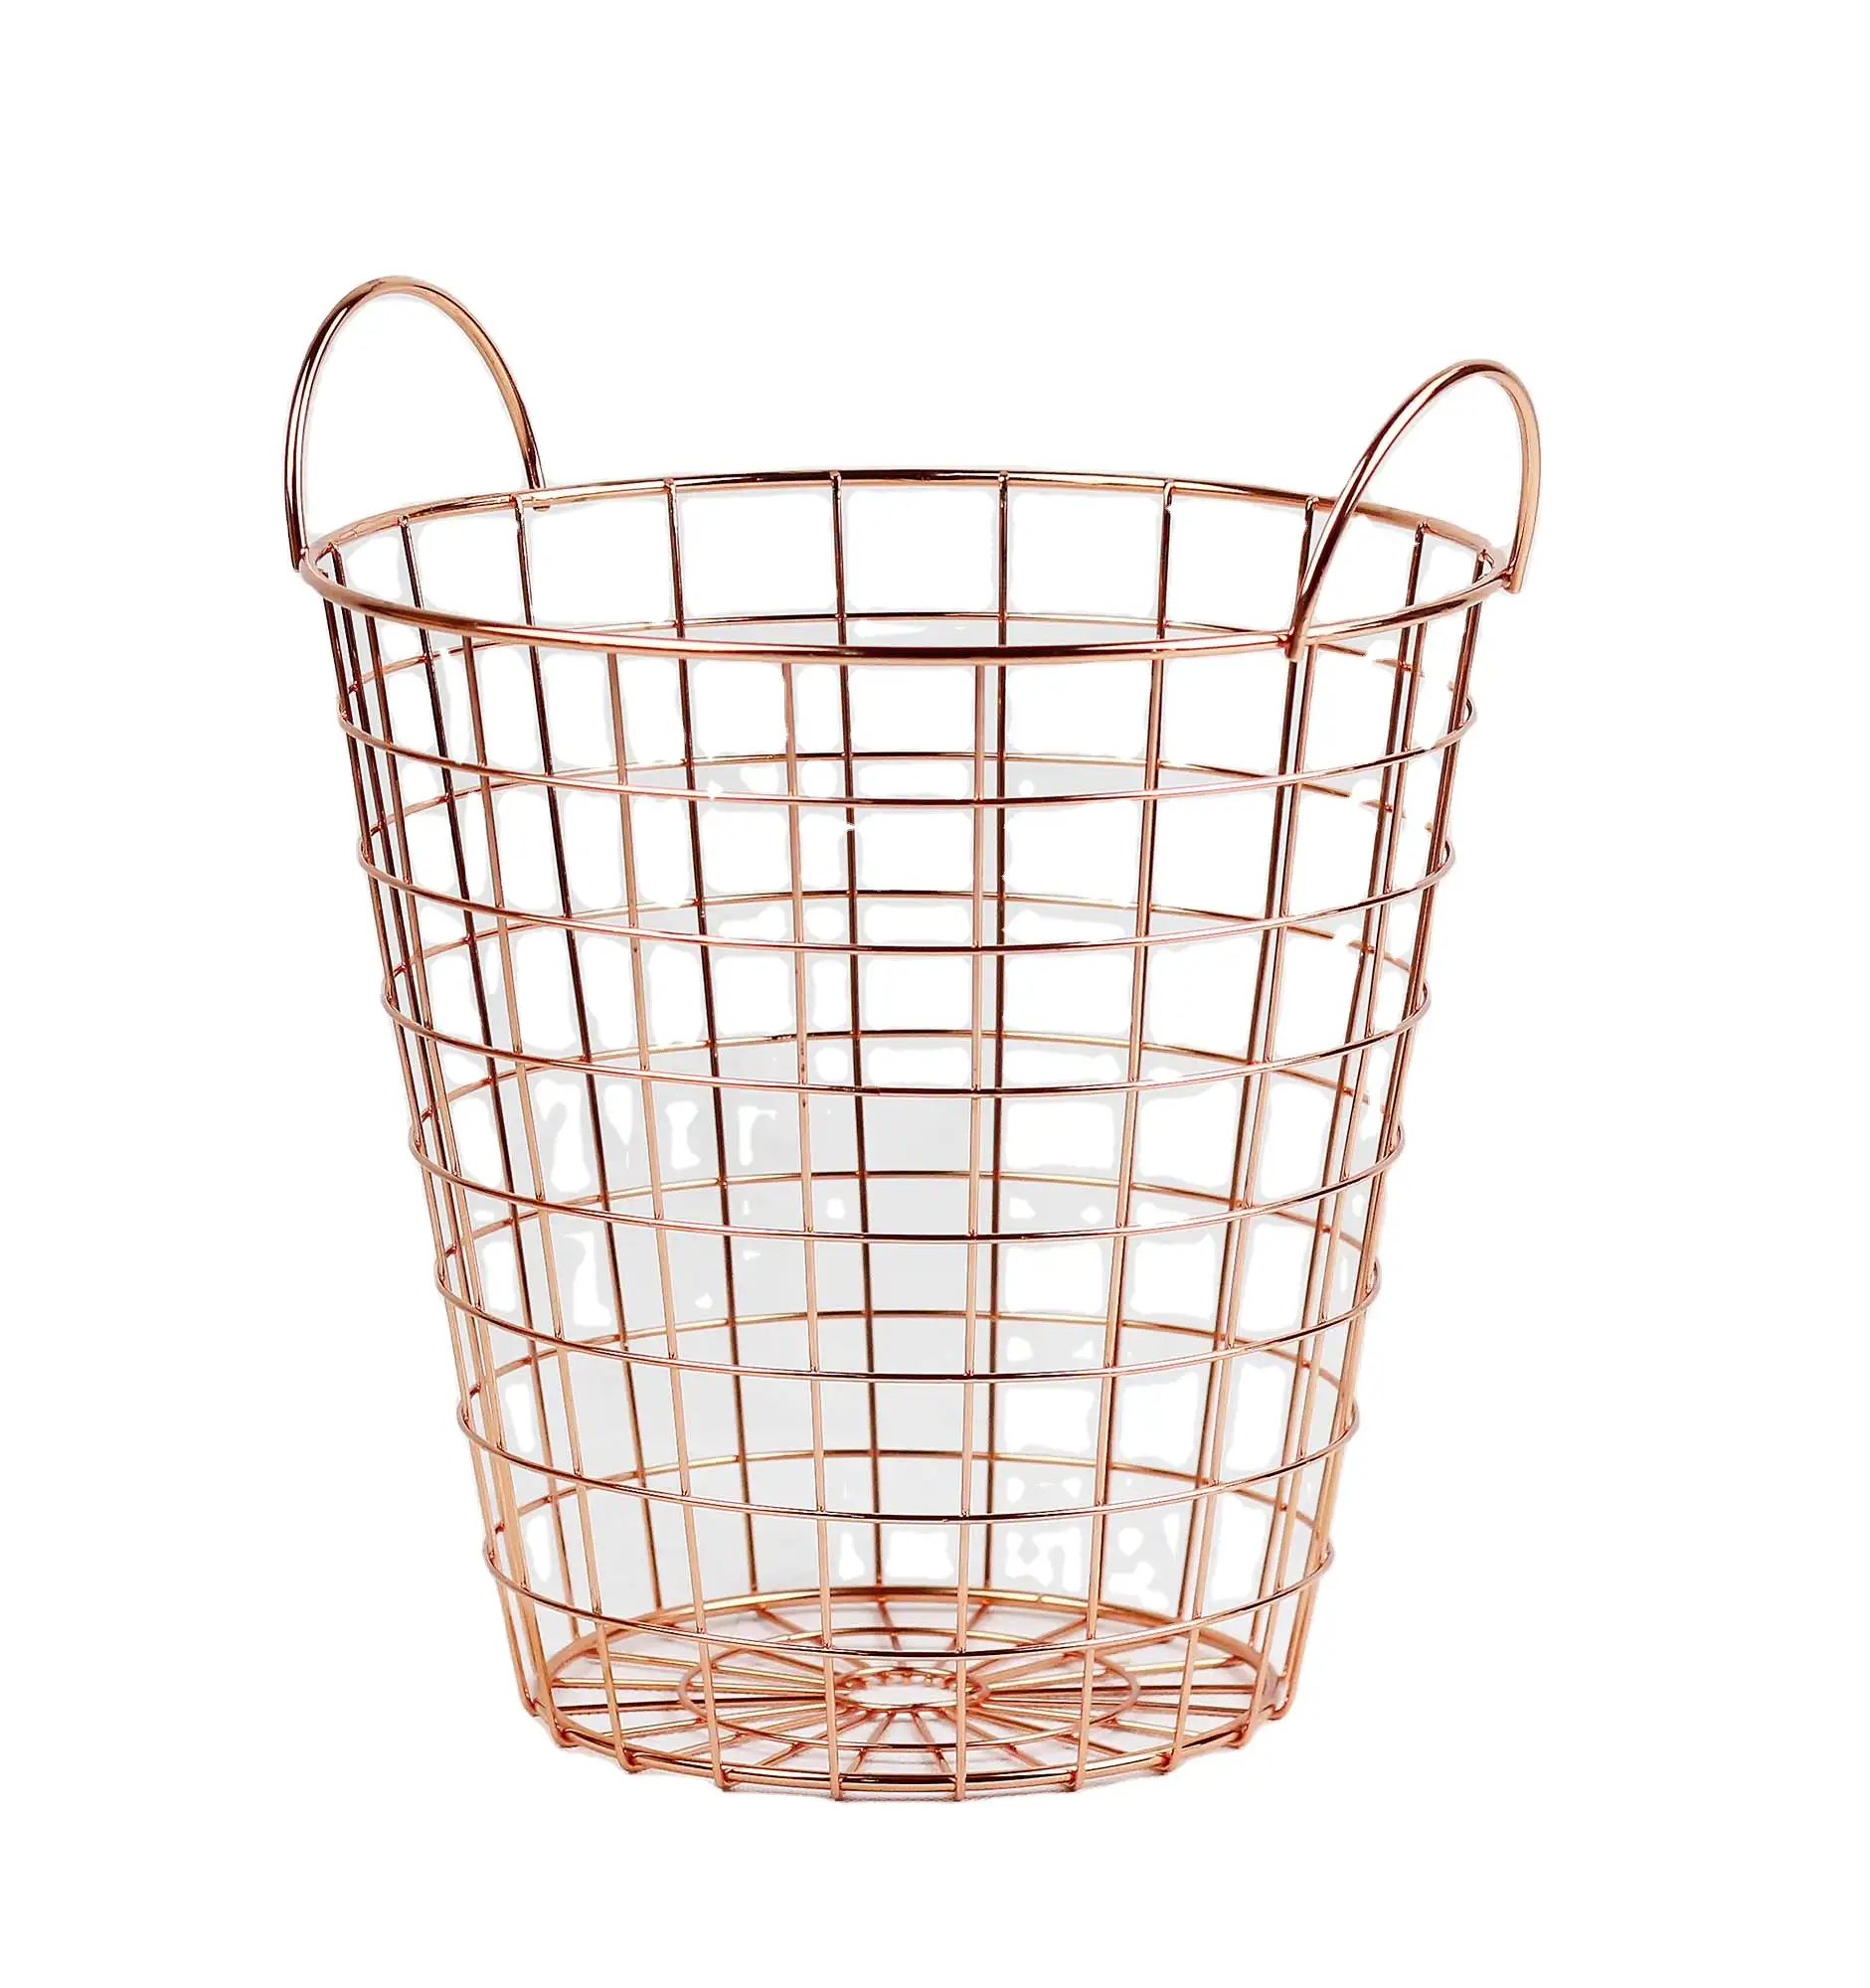 Custom Size Handcrafted Metal Wire Gold Color Plating Bathroom Storage Laundry Baskets Small